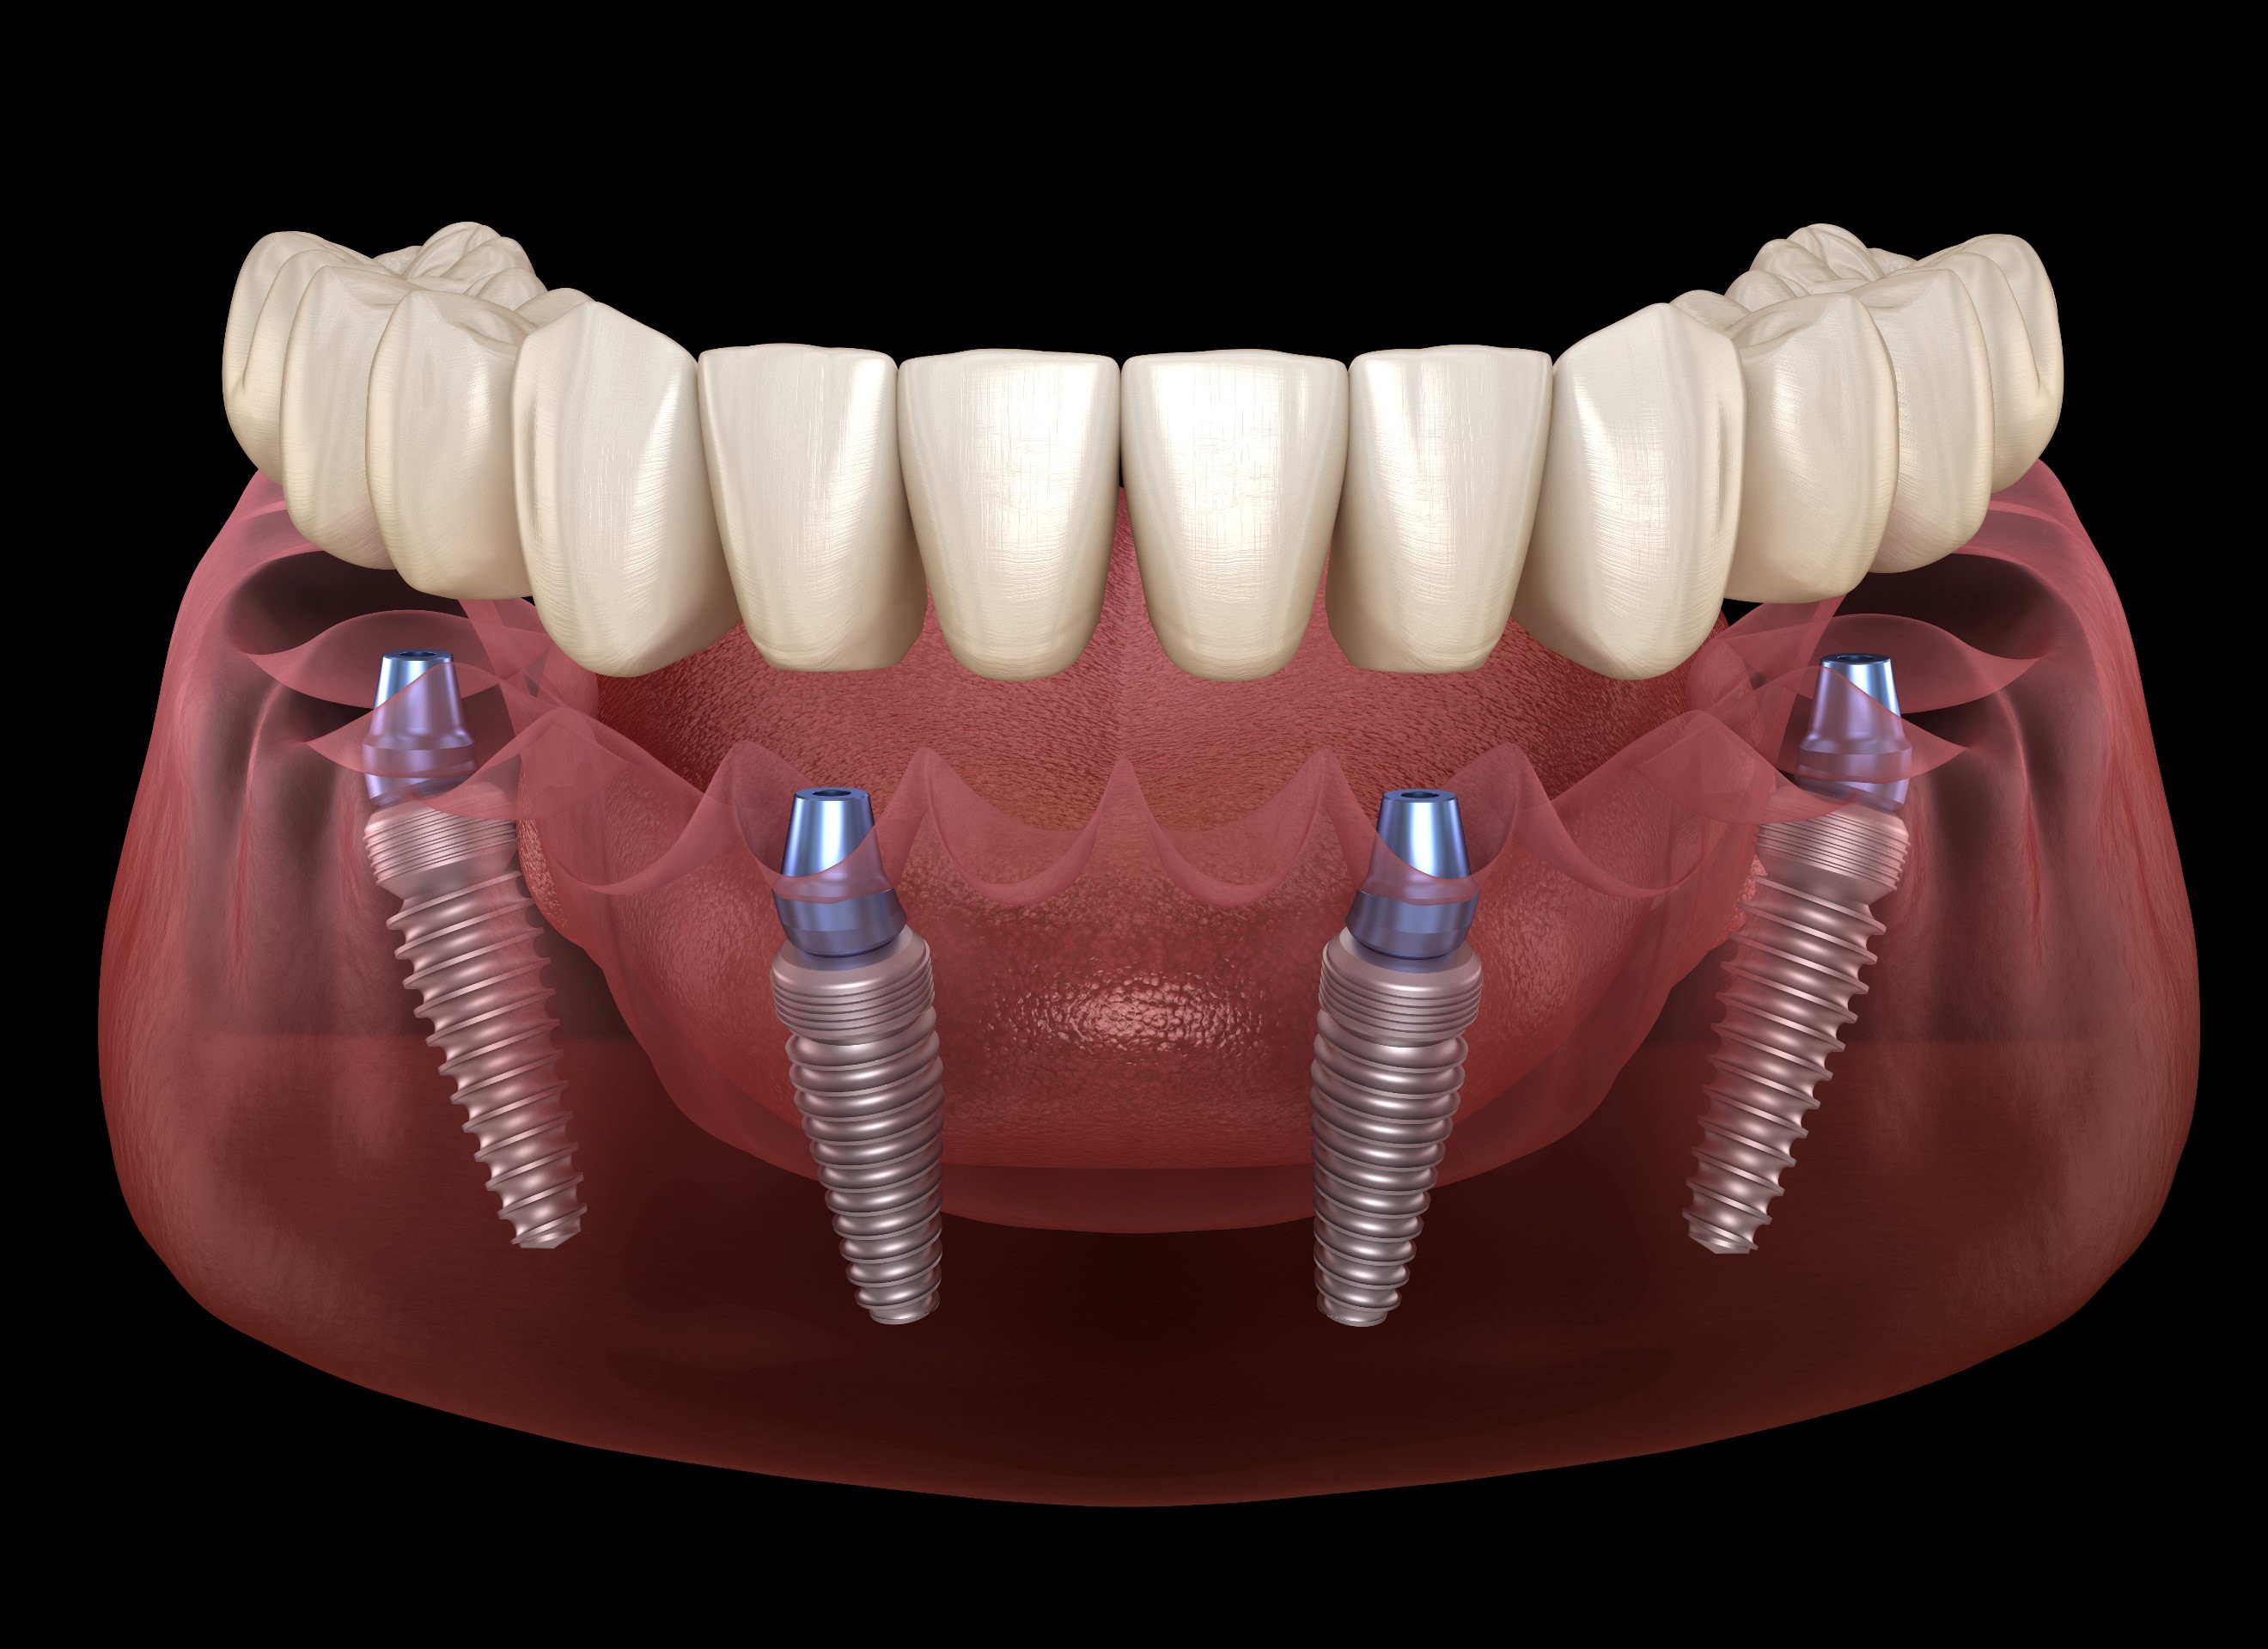 How Long Do Implants Last of tooth? 